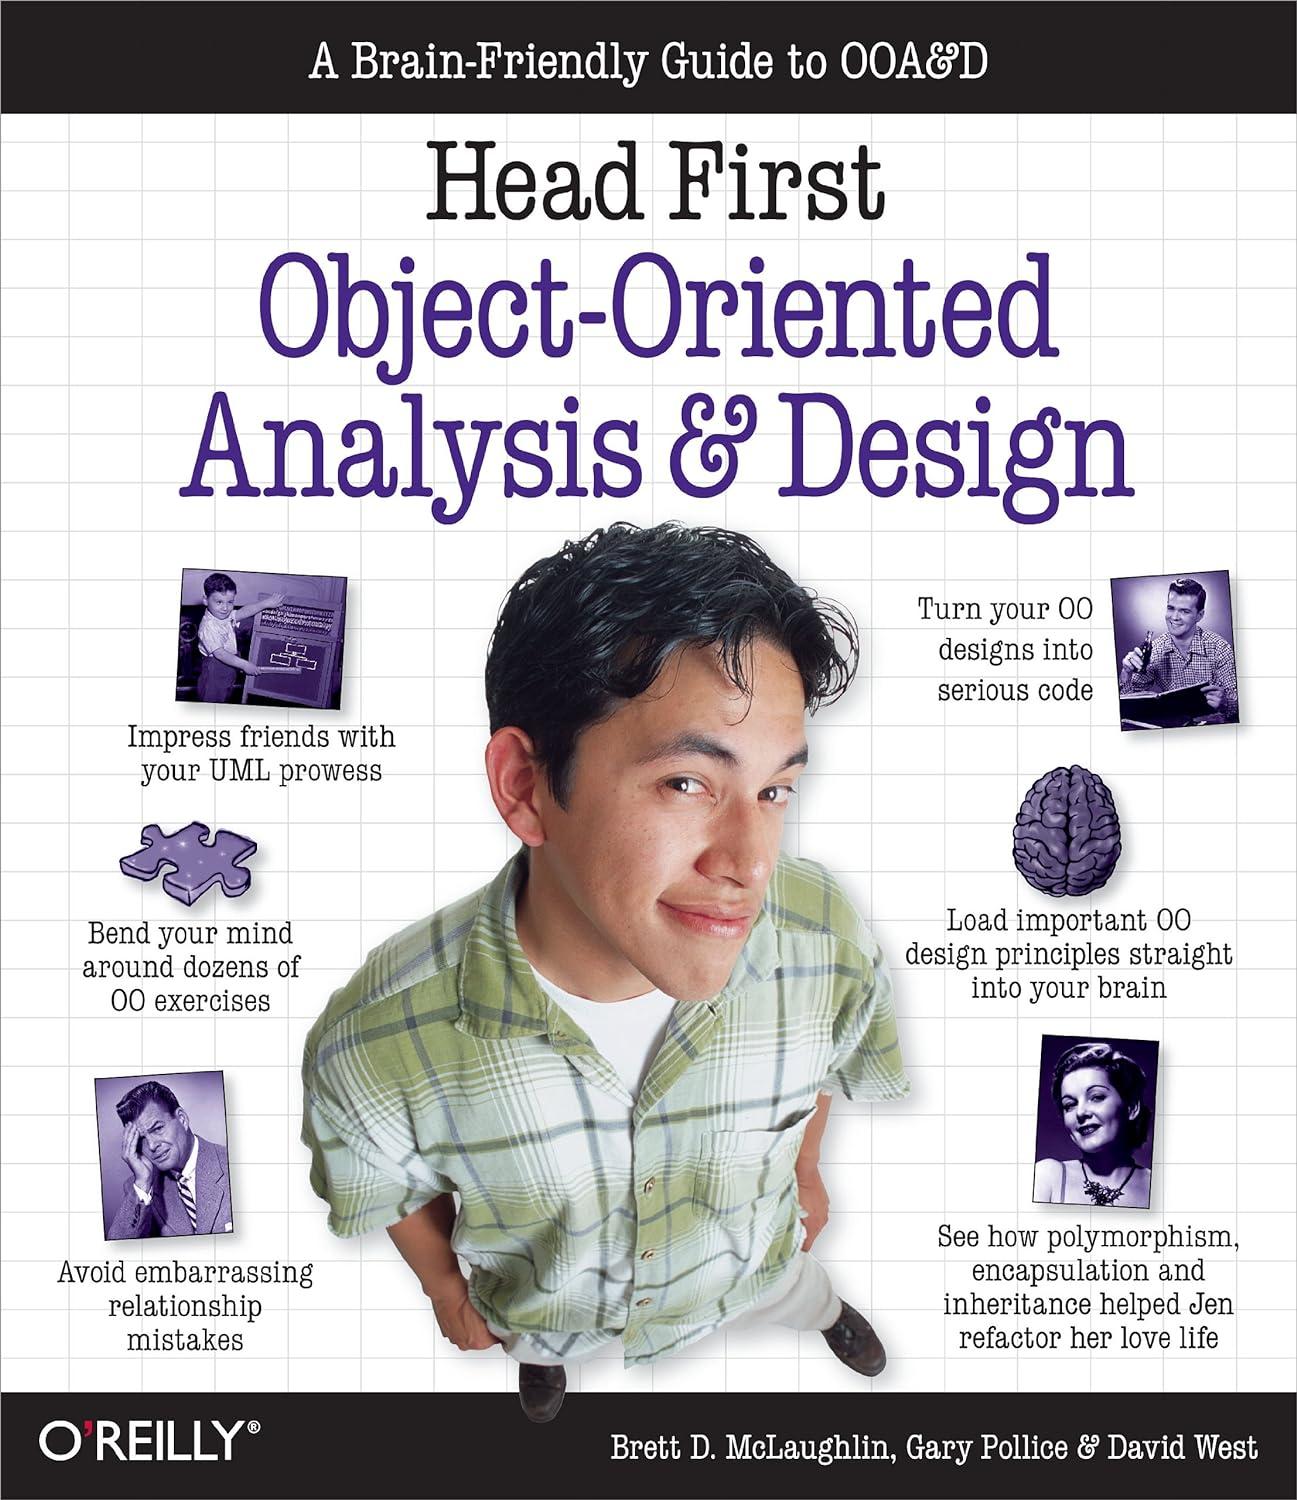 head first object-oriented analysis and design 1st edition brett d. mclaughlin, gary pollice, dave west